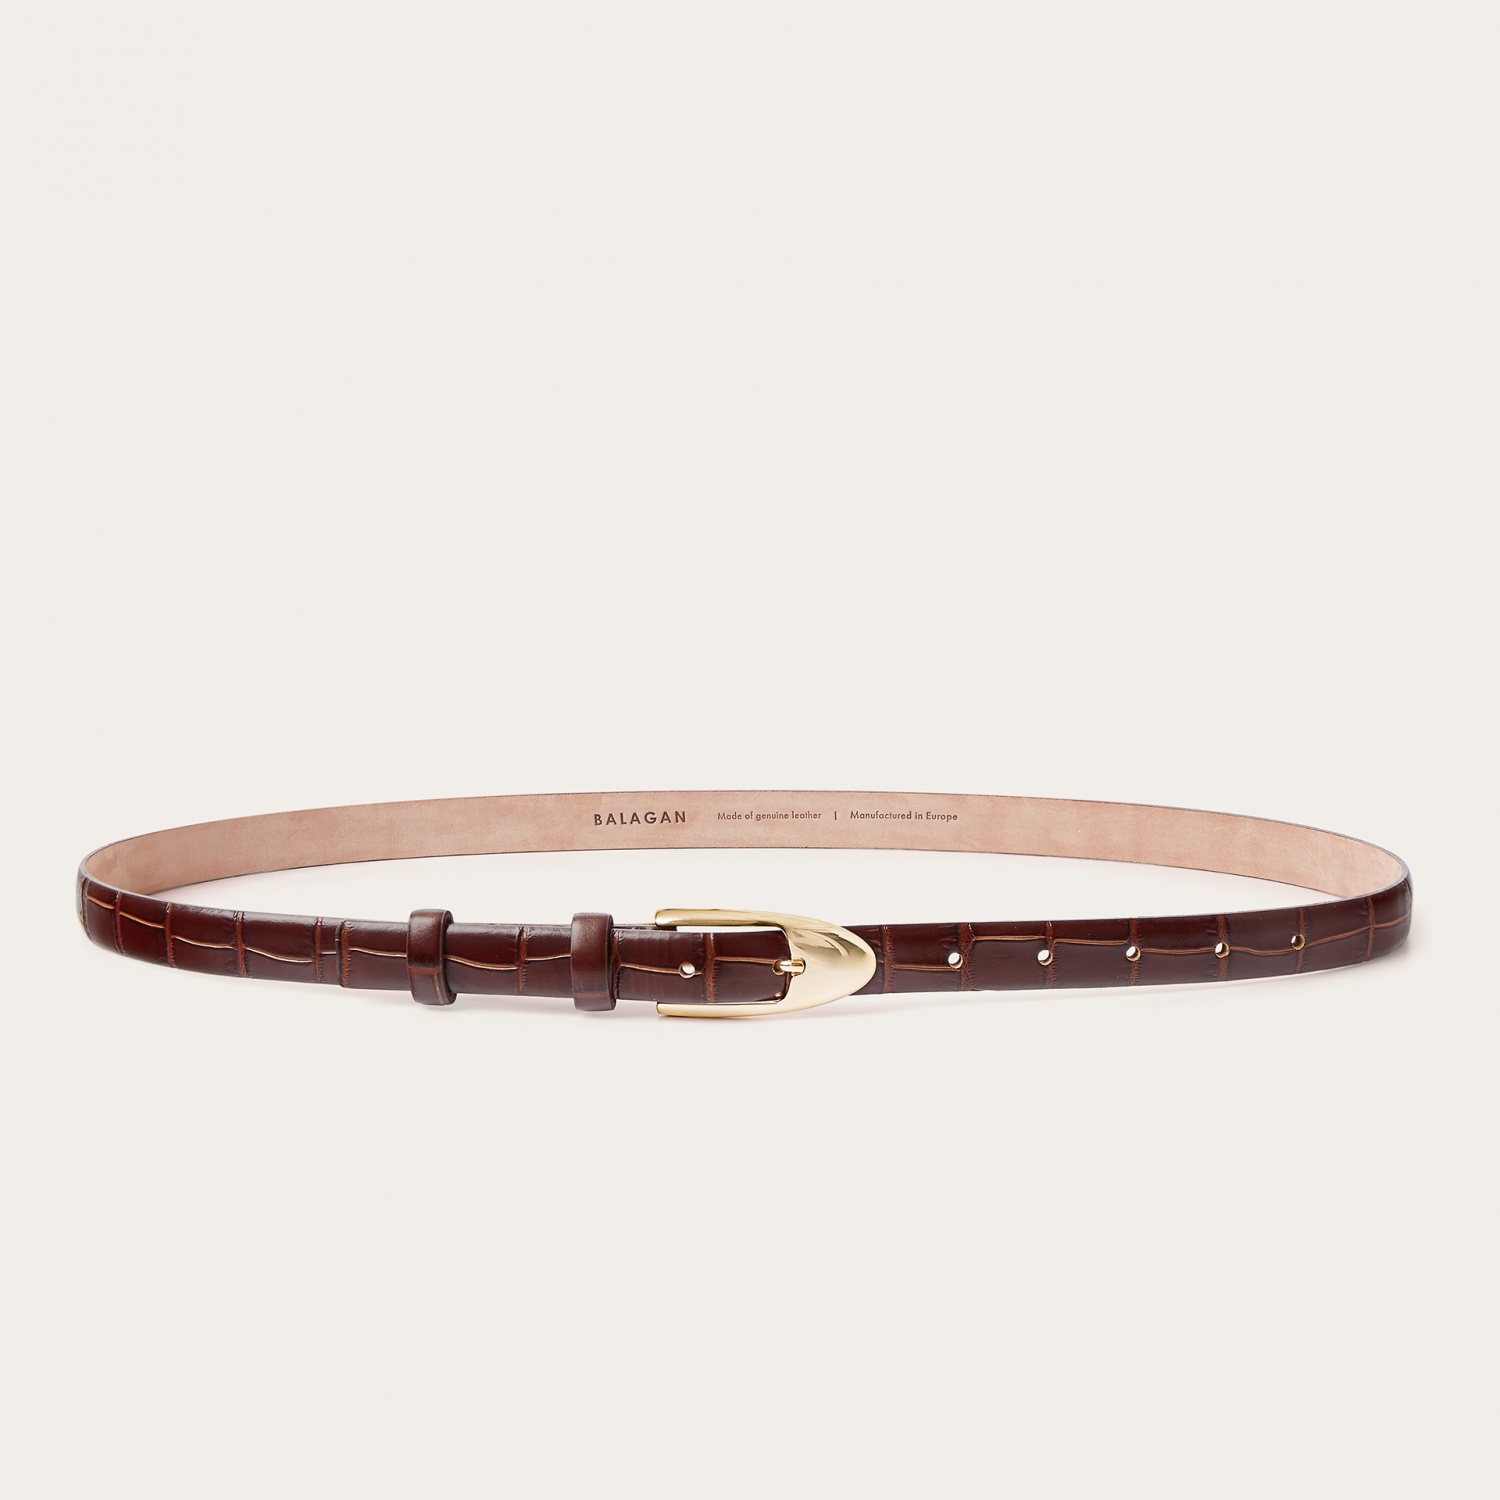  Thin belt with a buckle, brown croce pattern-0 